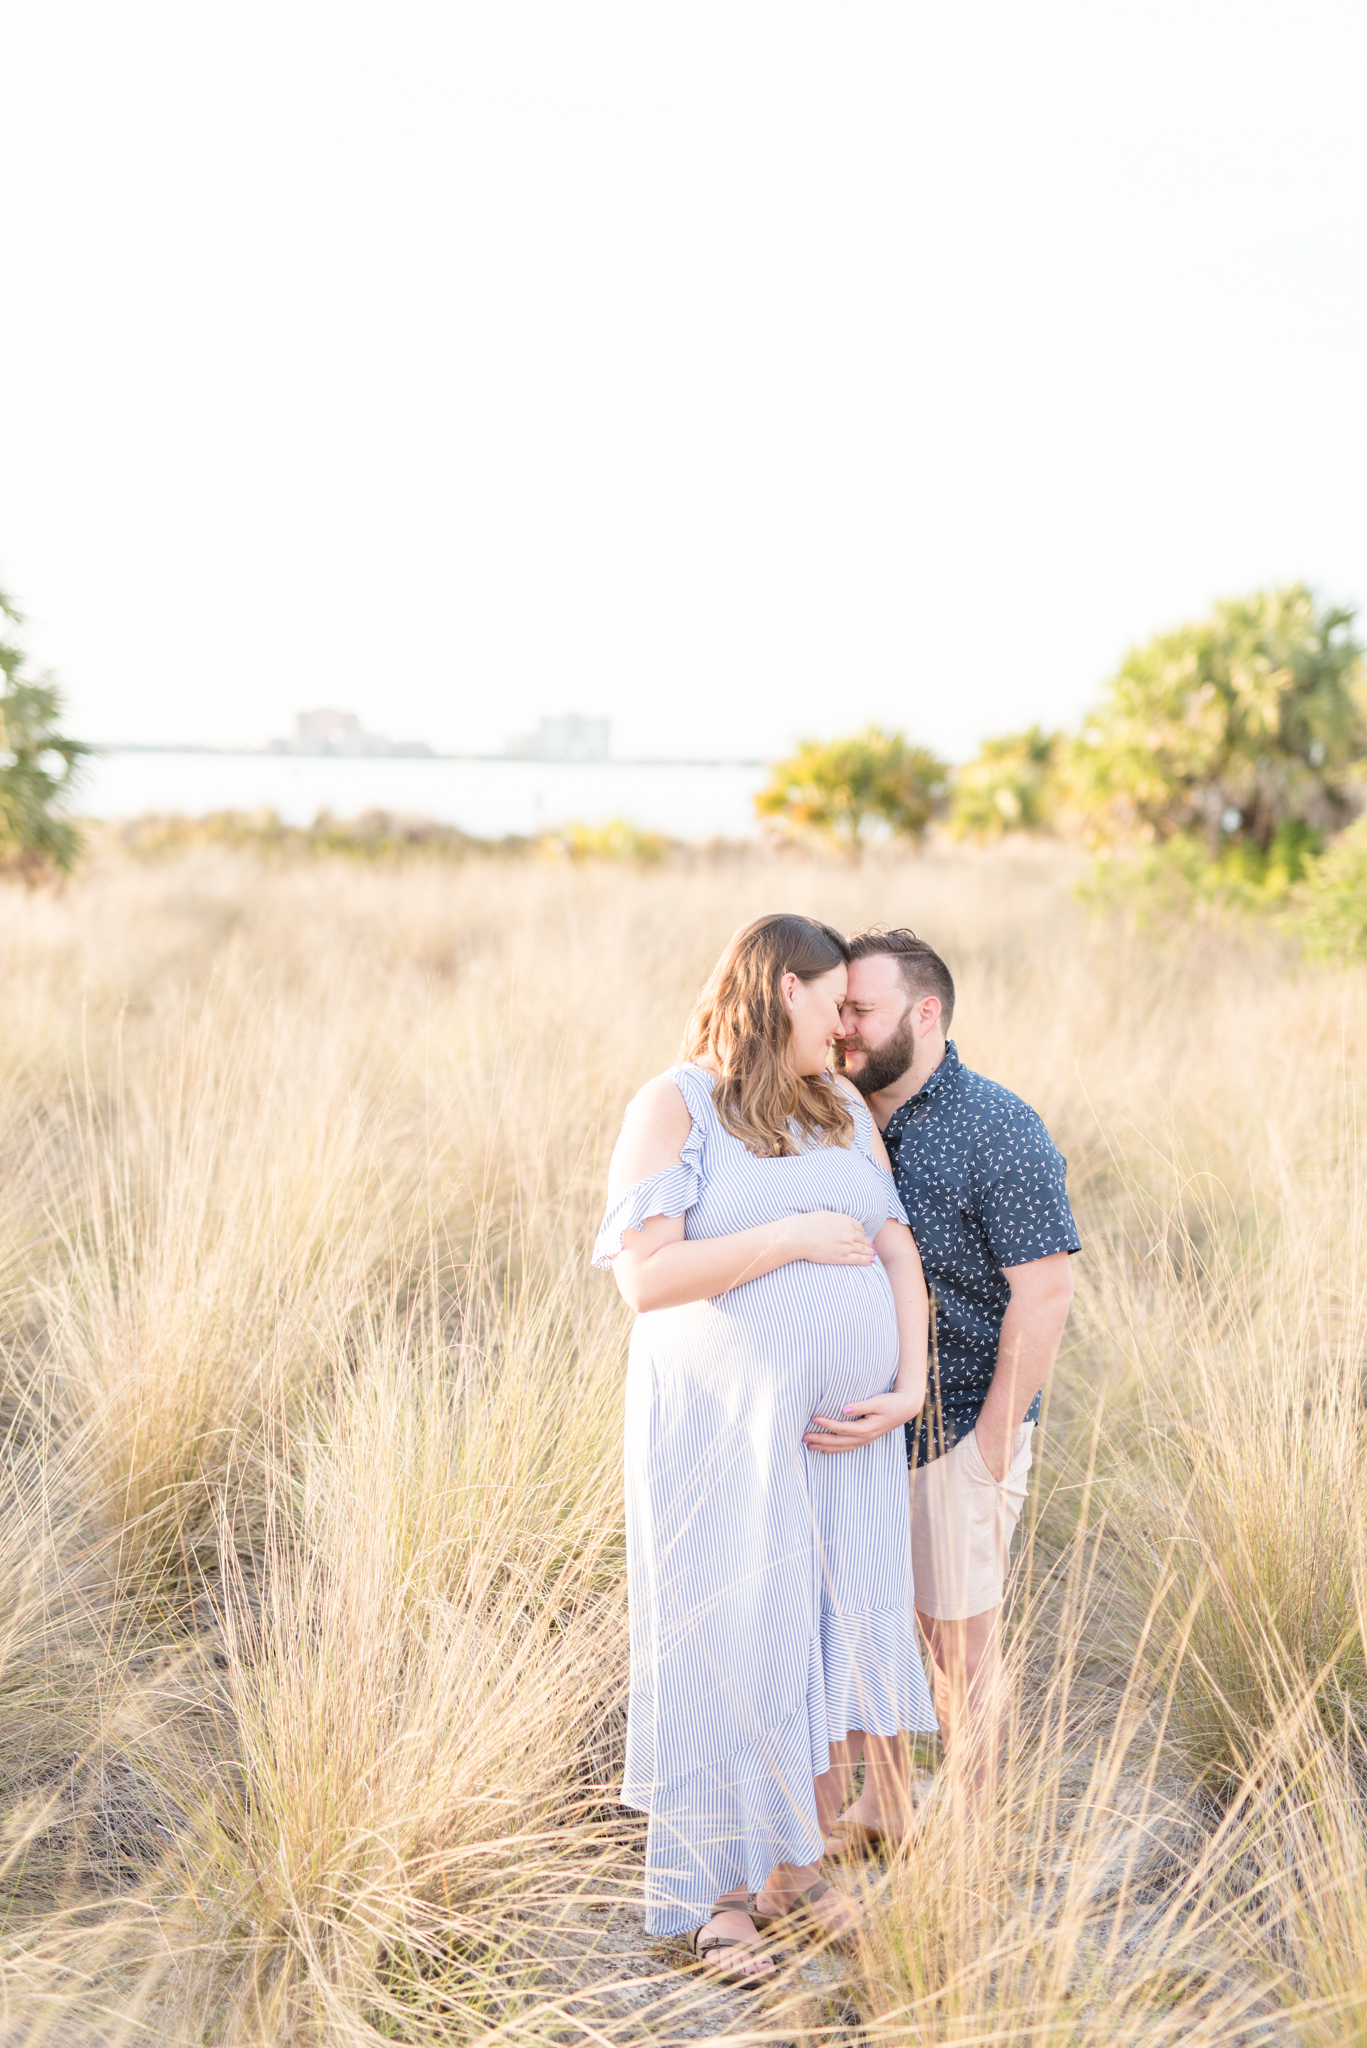 Tampa couple snuggles during maternity pictures.